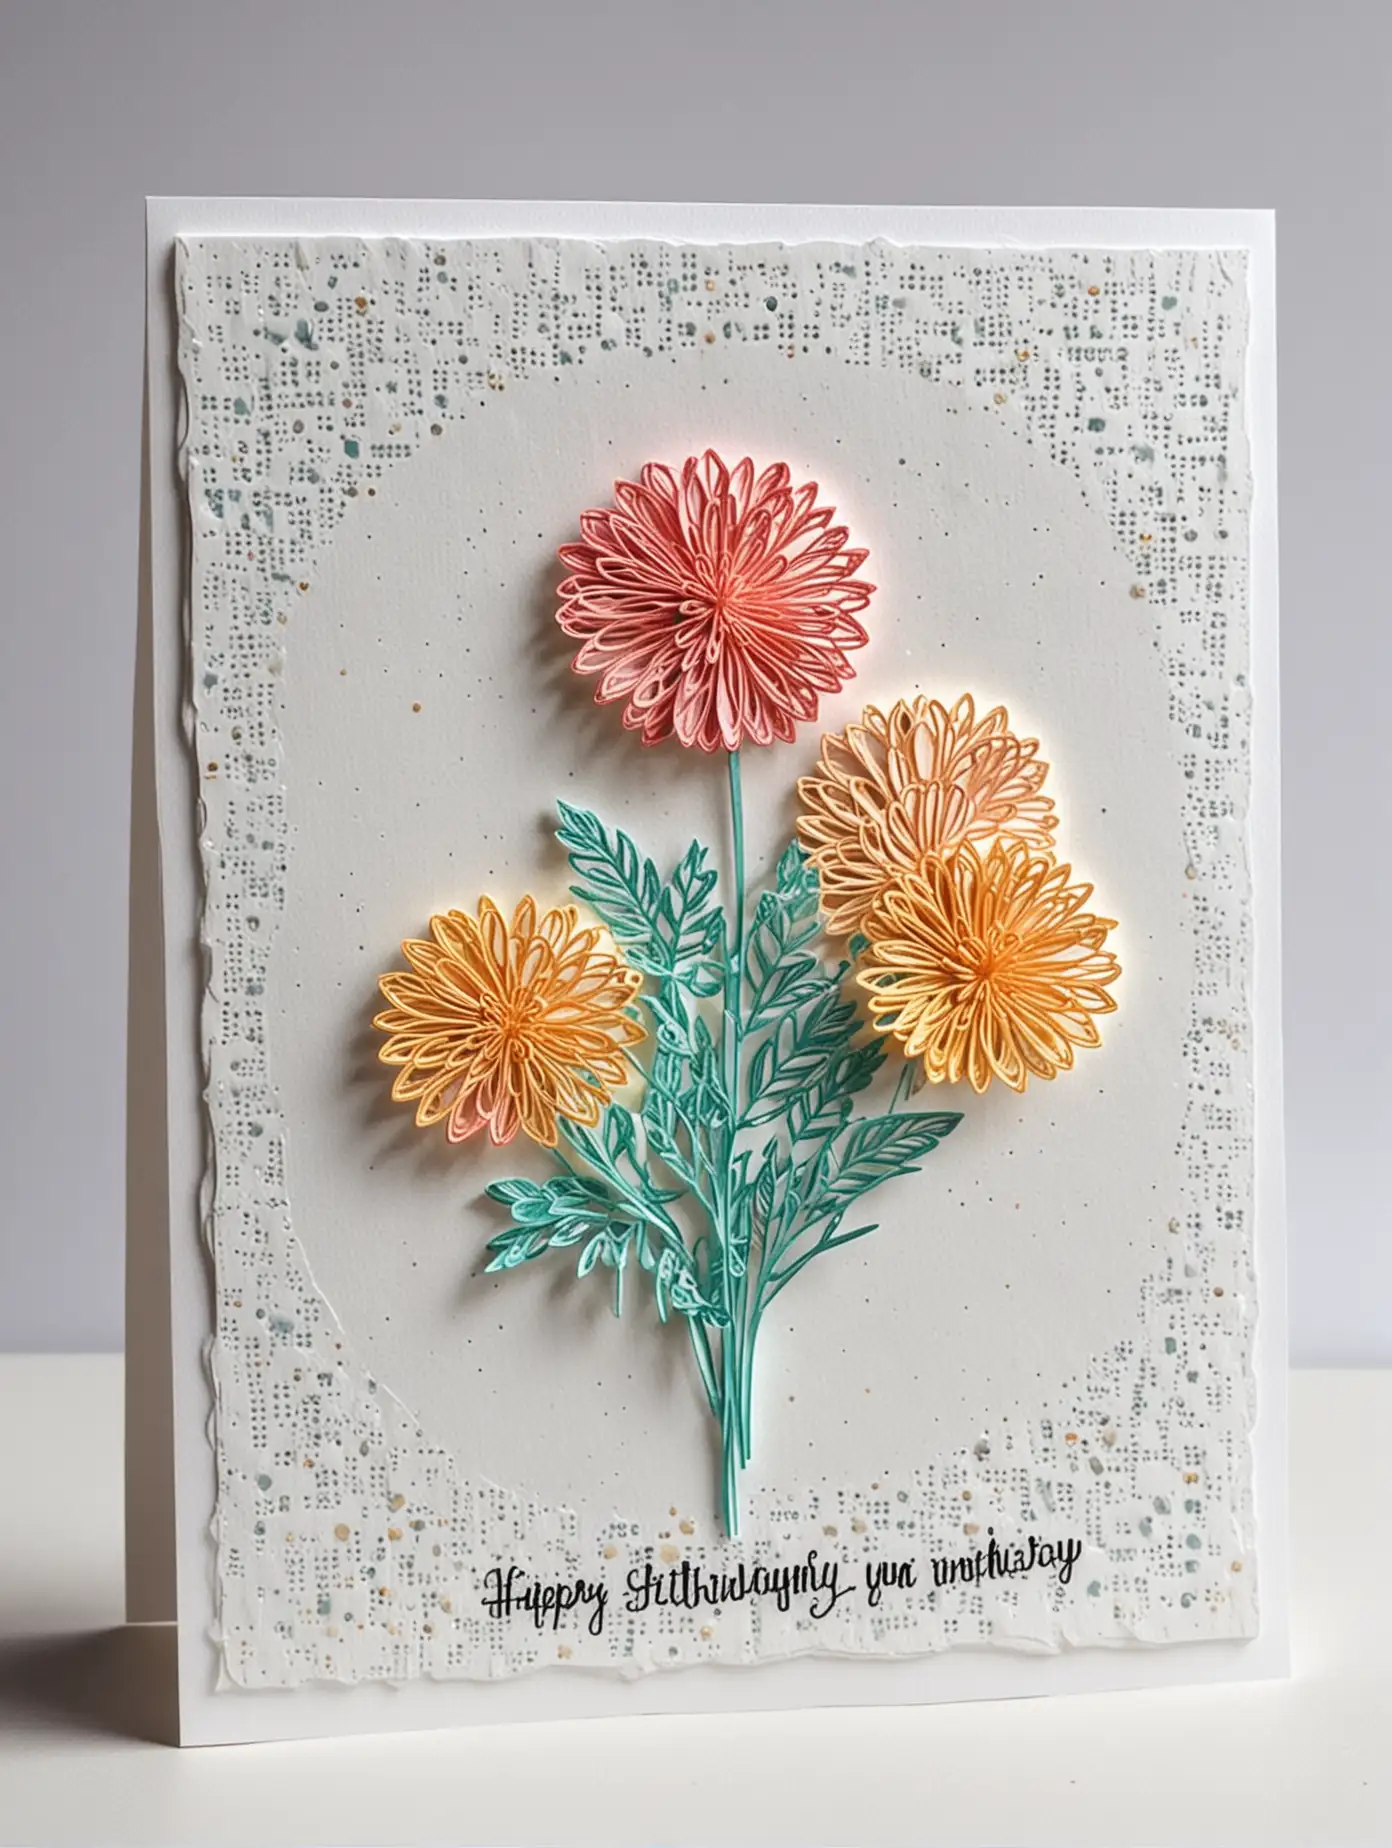 Minimalist Scrapbooking Birthday Card with Hot Embossing Technique